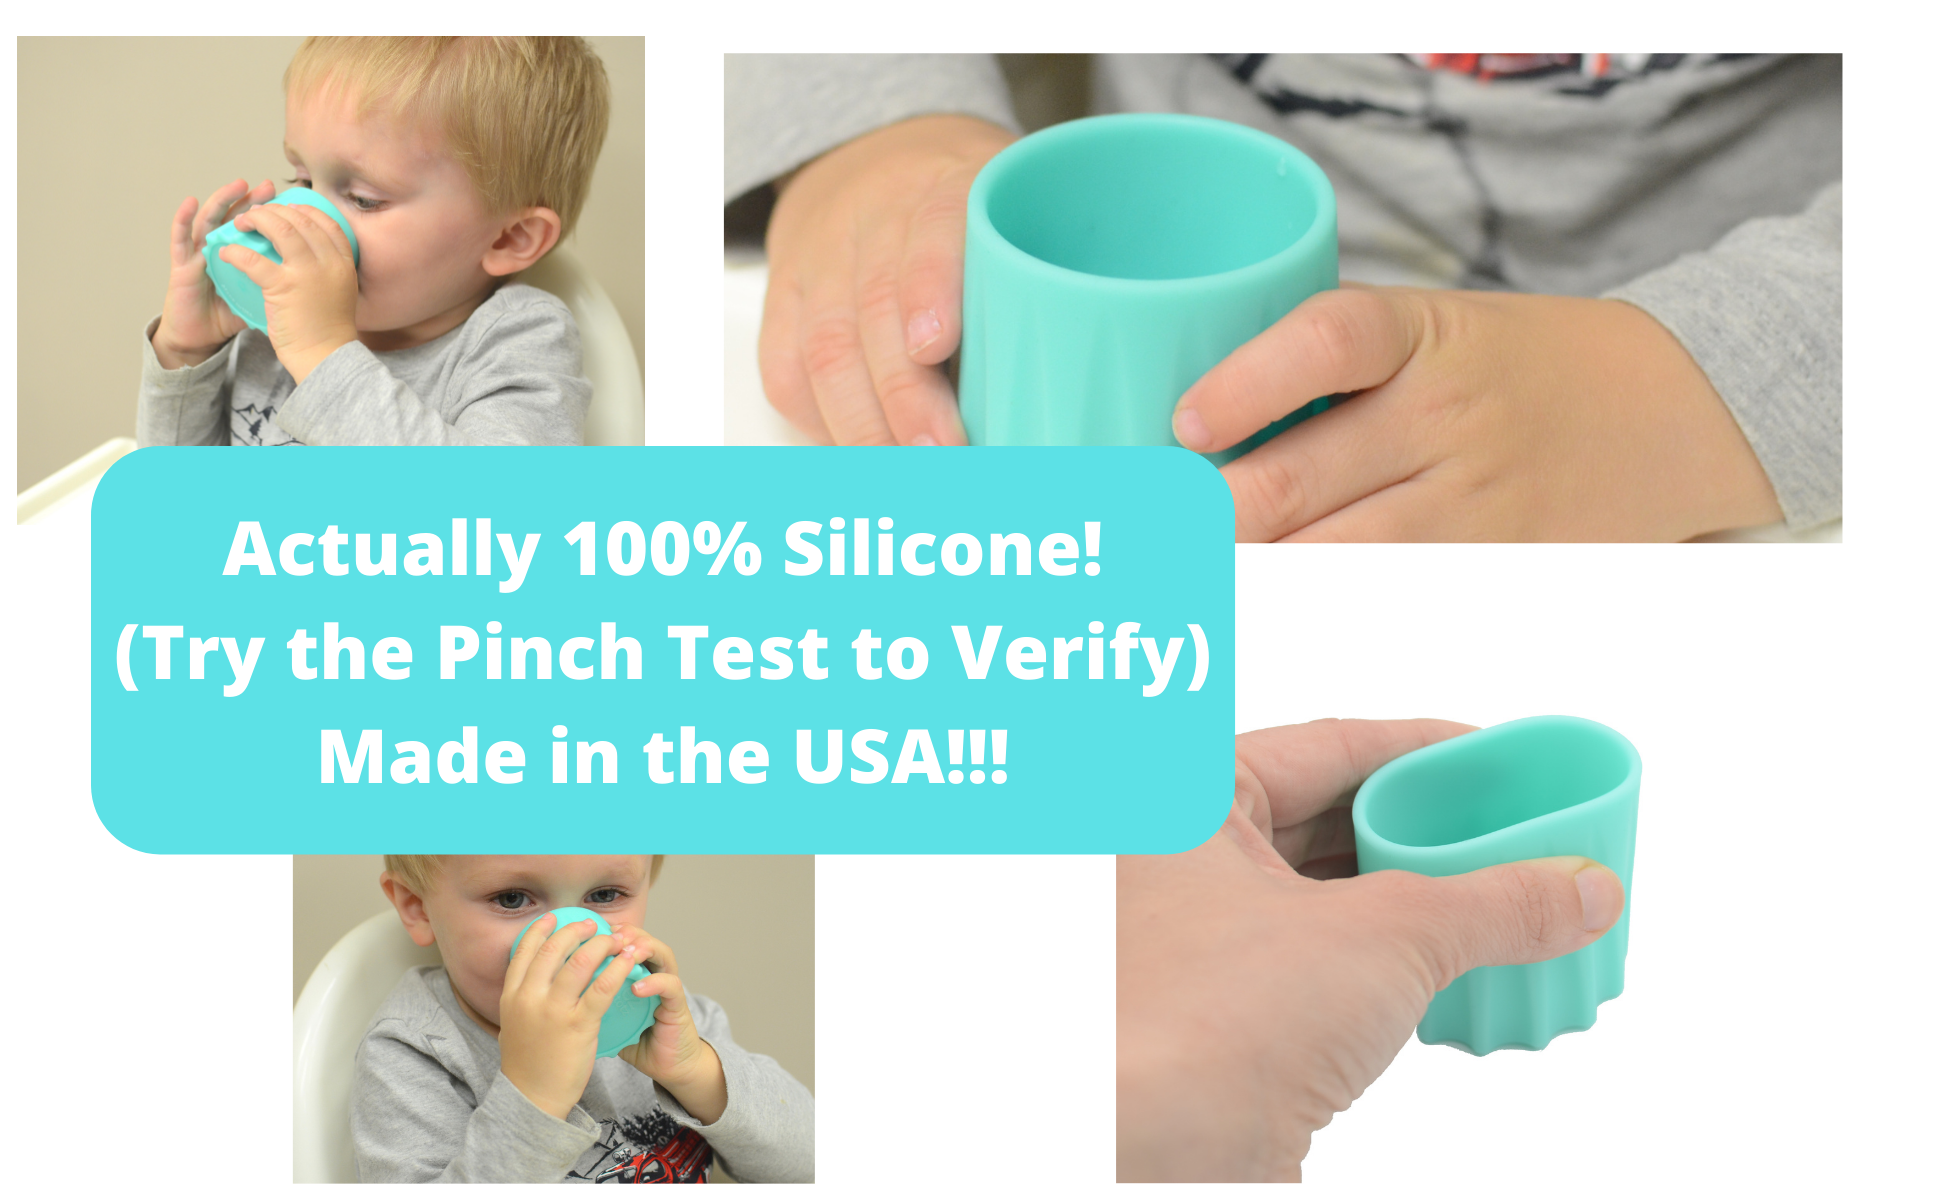 Eztotz My First Cup, 100% Silicone Baby/Toddler Cup Made in USA